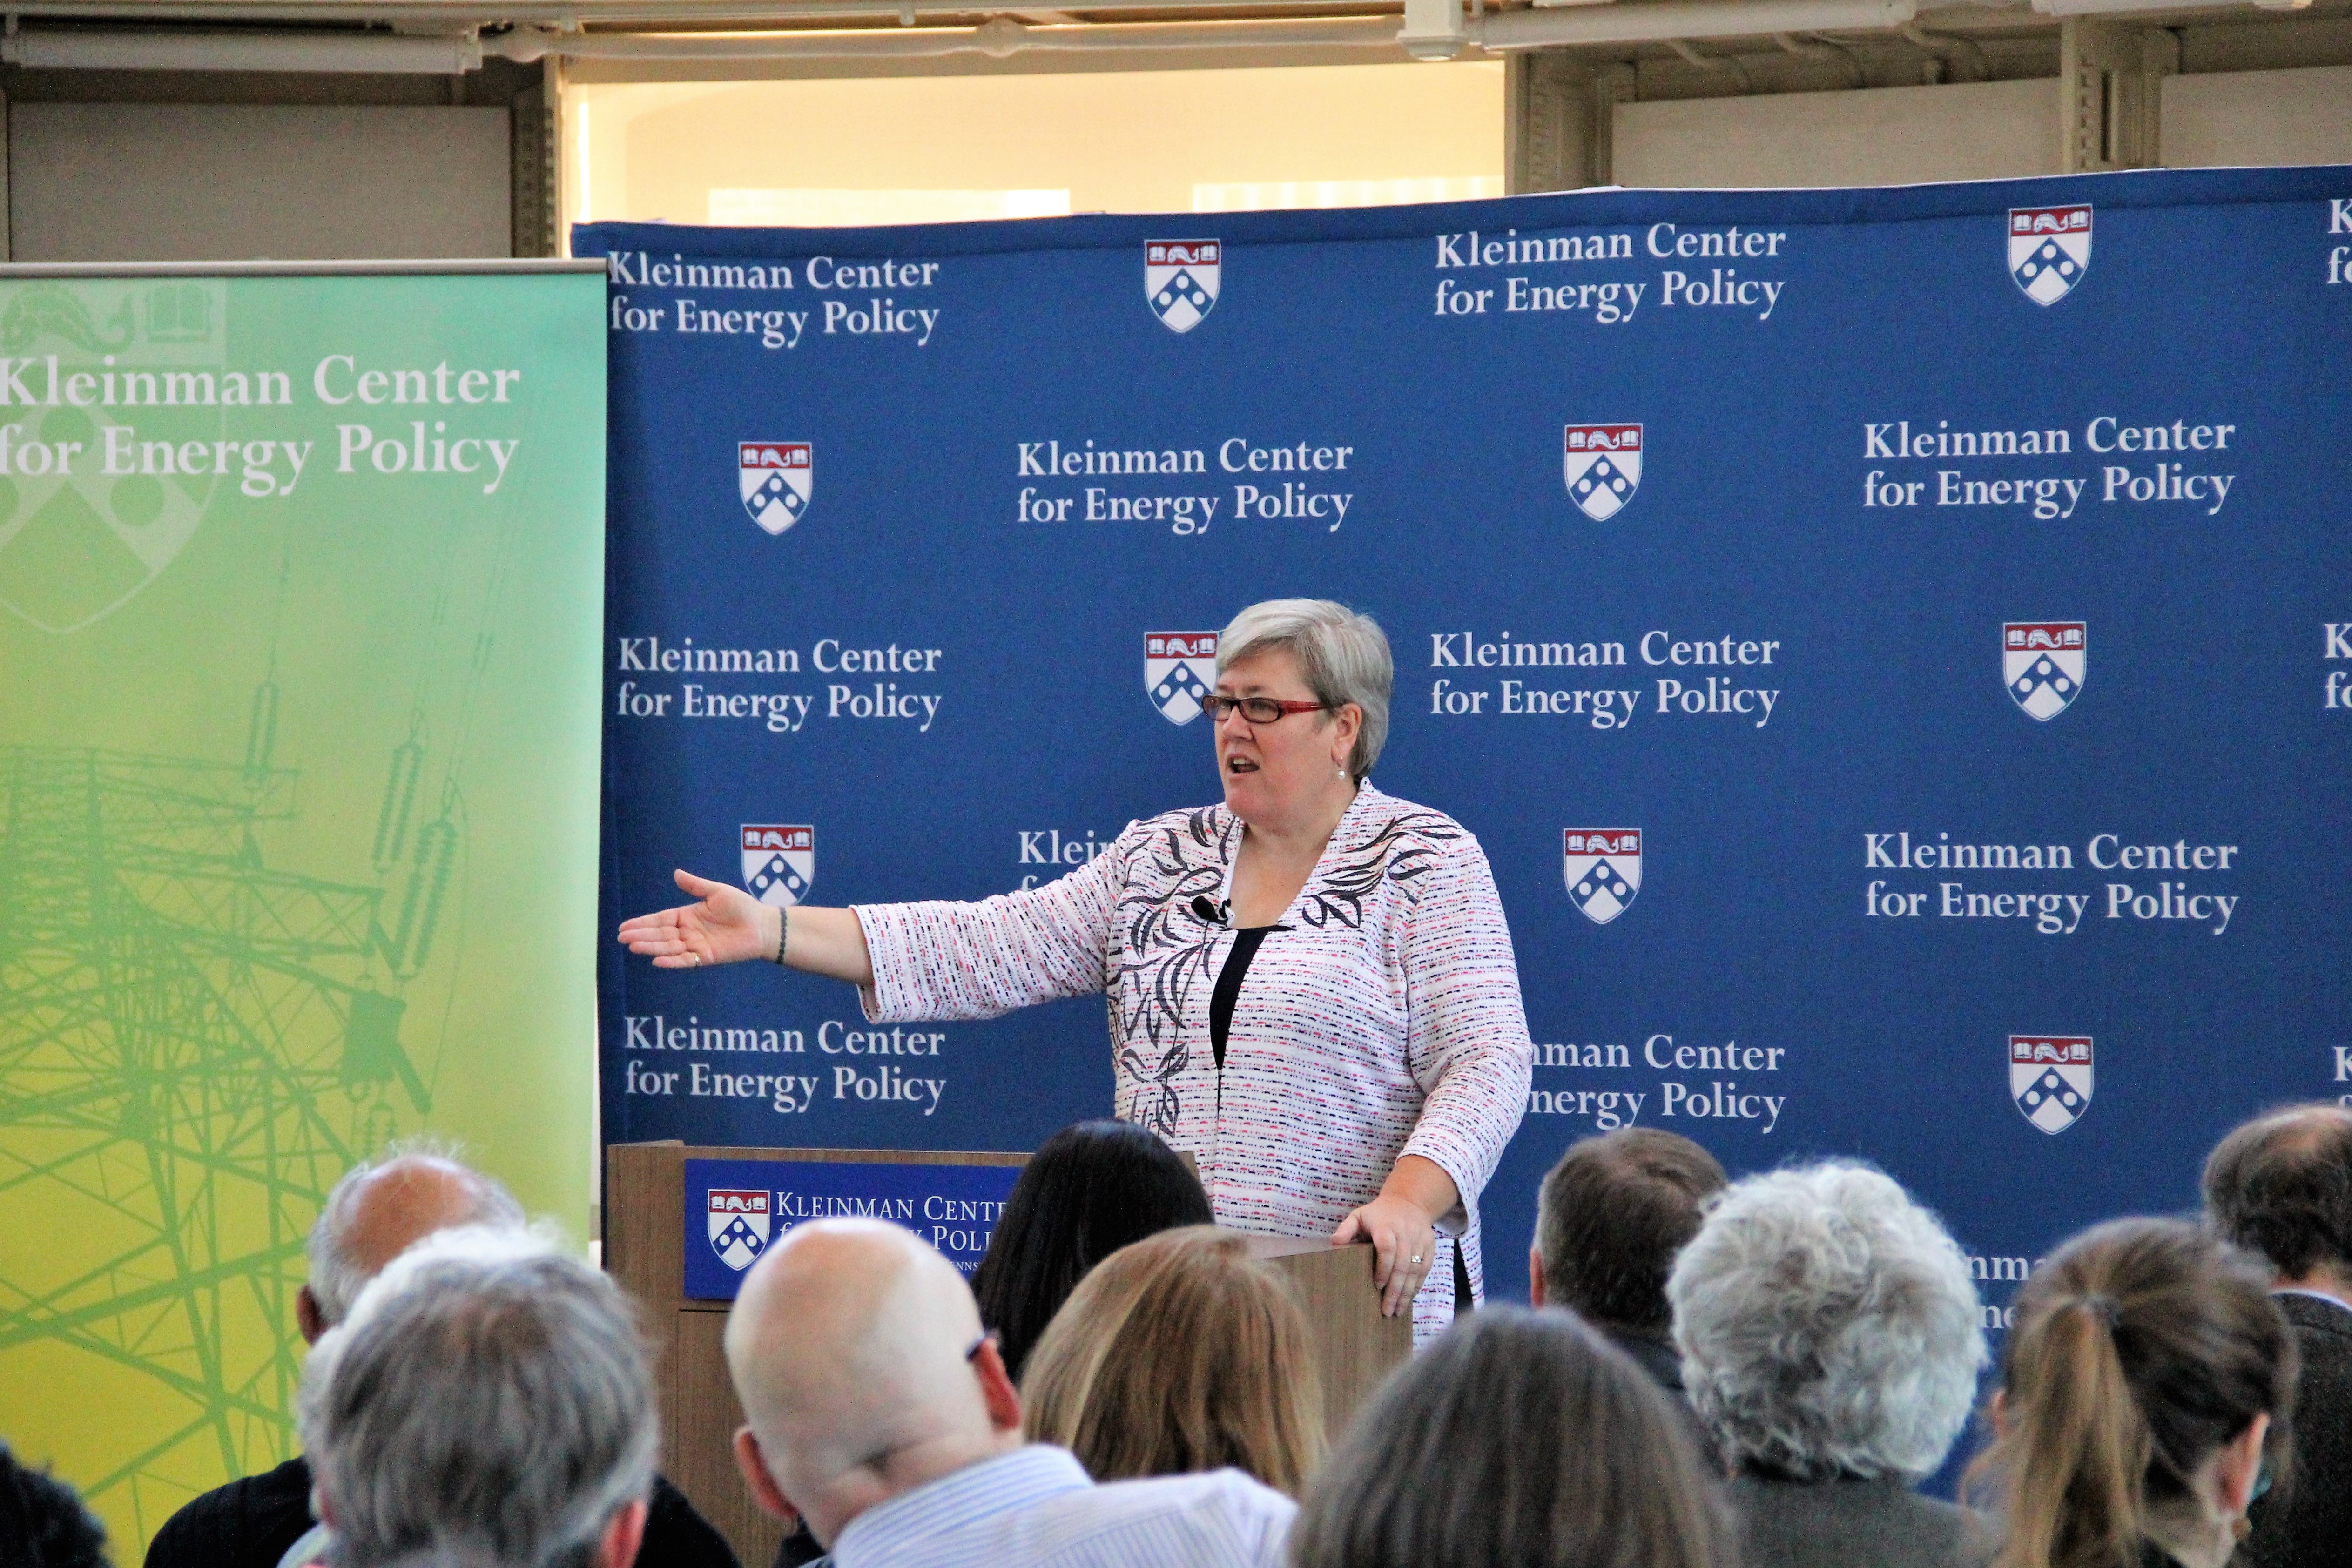 Rachel Kyte stands at a podium speaking, the sign on the podium reads "Kleinman Center for Energy Policy."